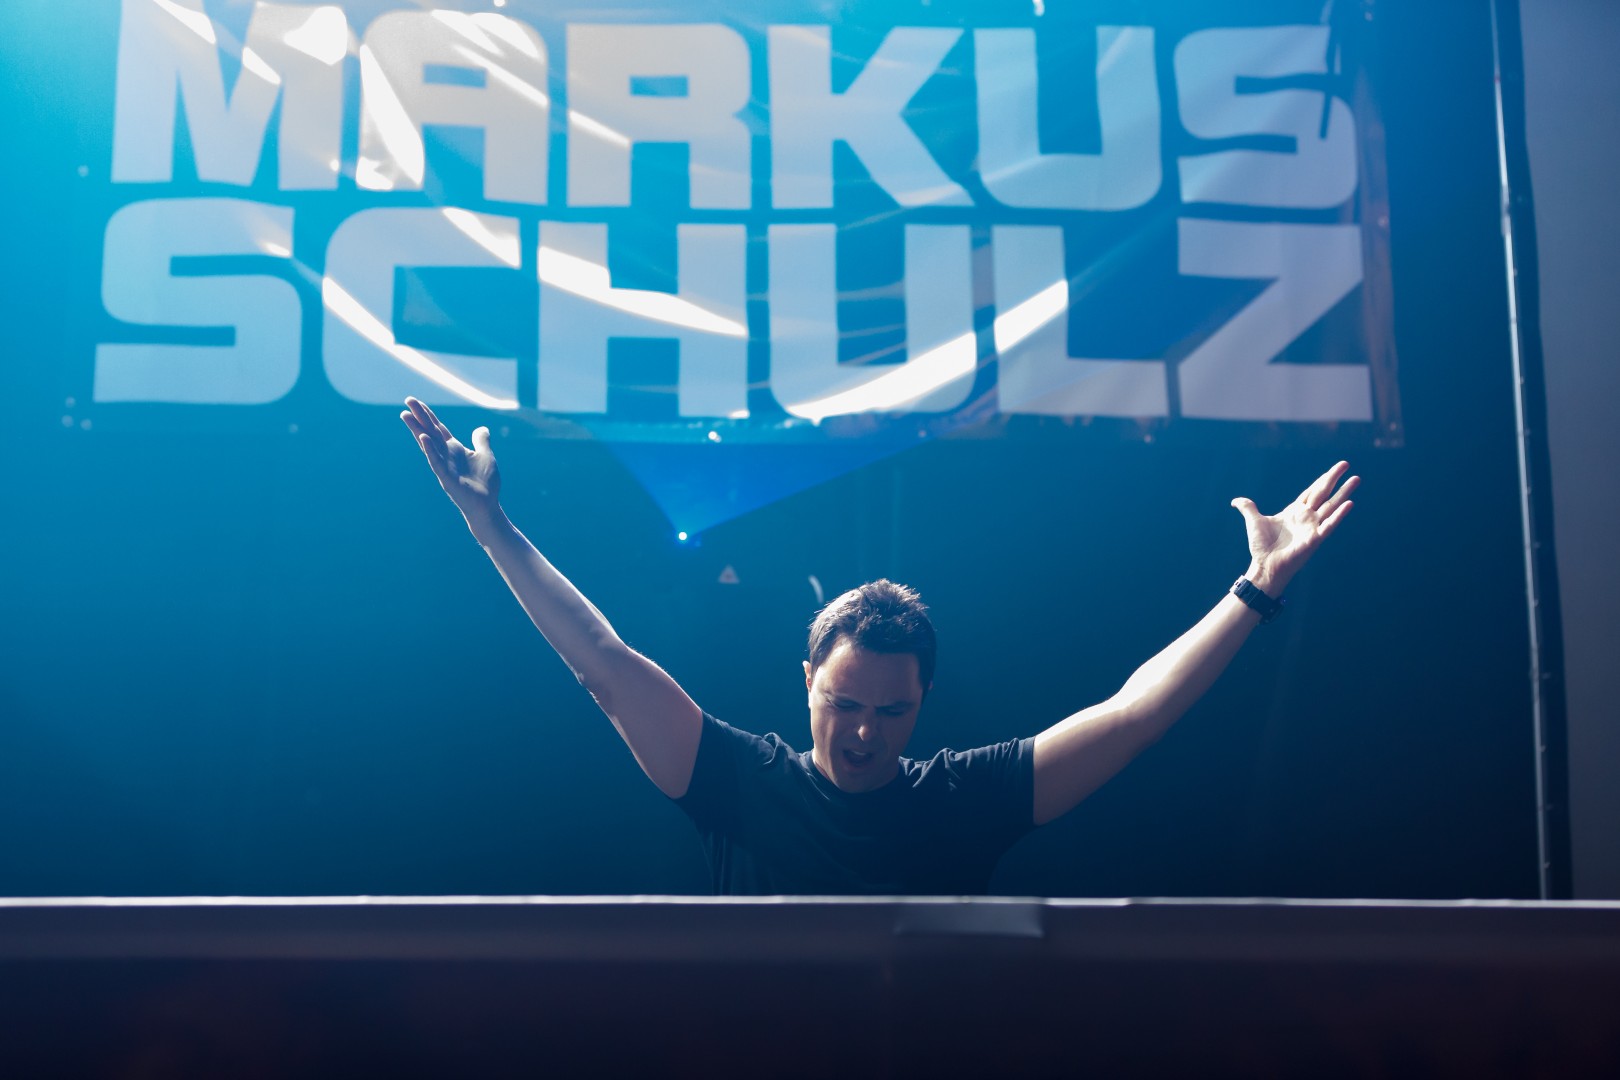 Markus Schulz at Arenele Romane in Bucharest on February 8, 2015 (cc08319a12)